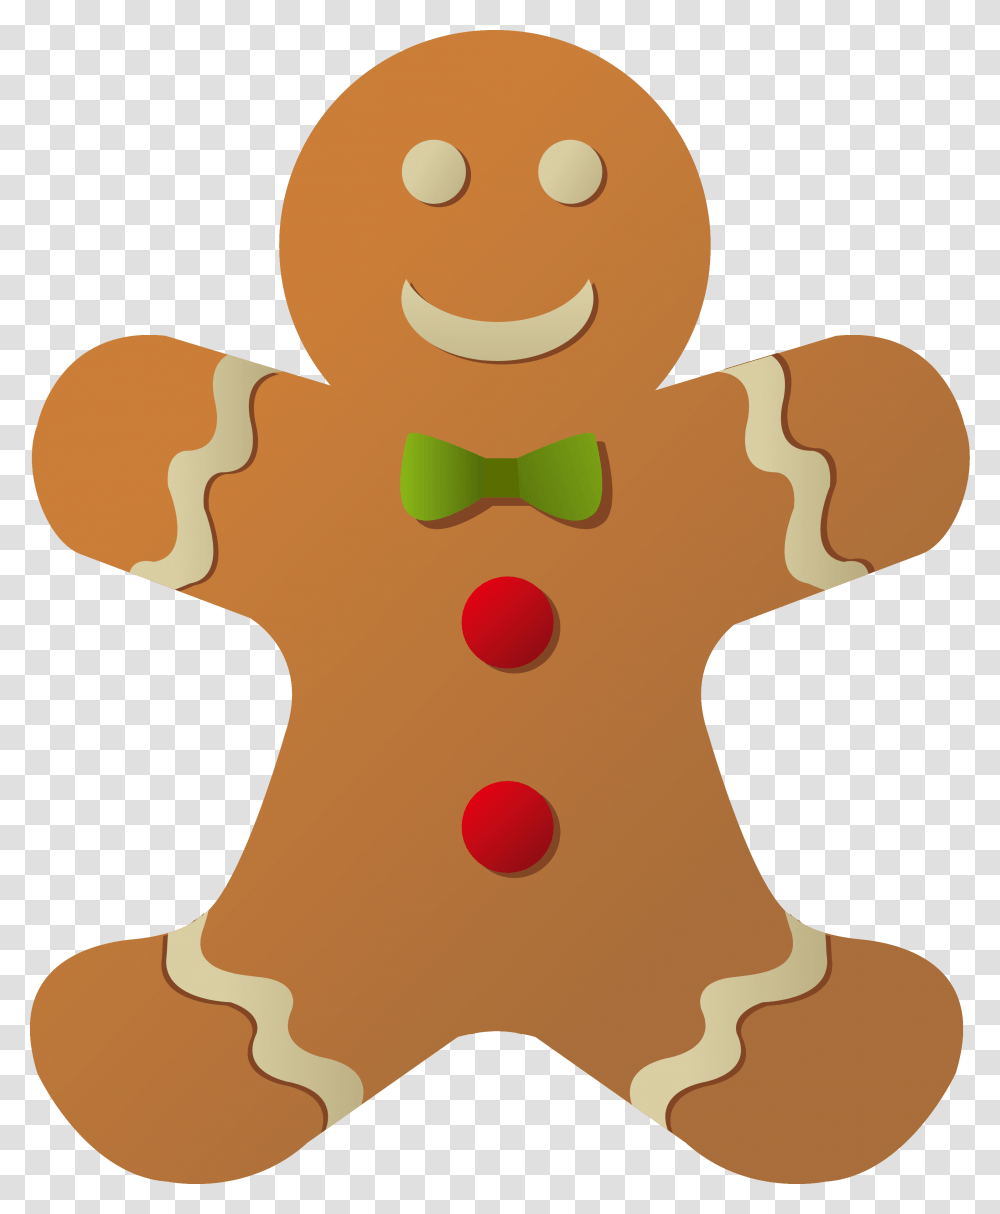 The Gingerbread Man Gingerbread House Santa Claus Gingerbread Man, Cookie, Food, Biscuit, Sweets Transparent Png